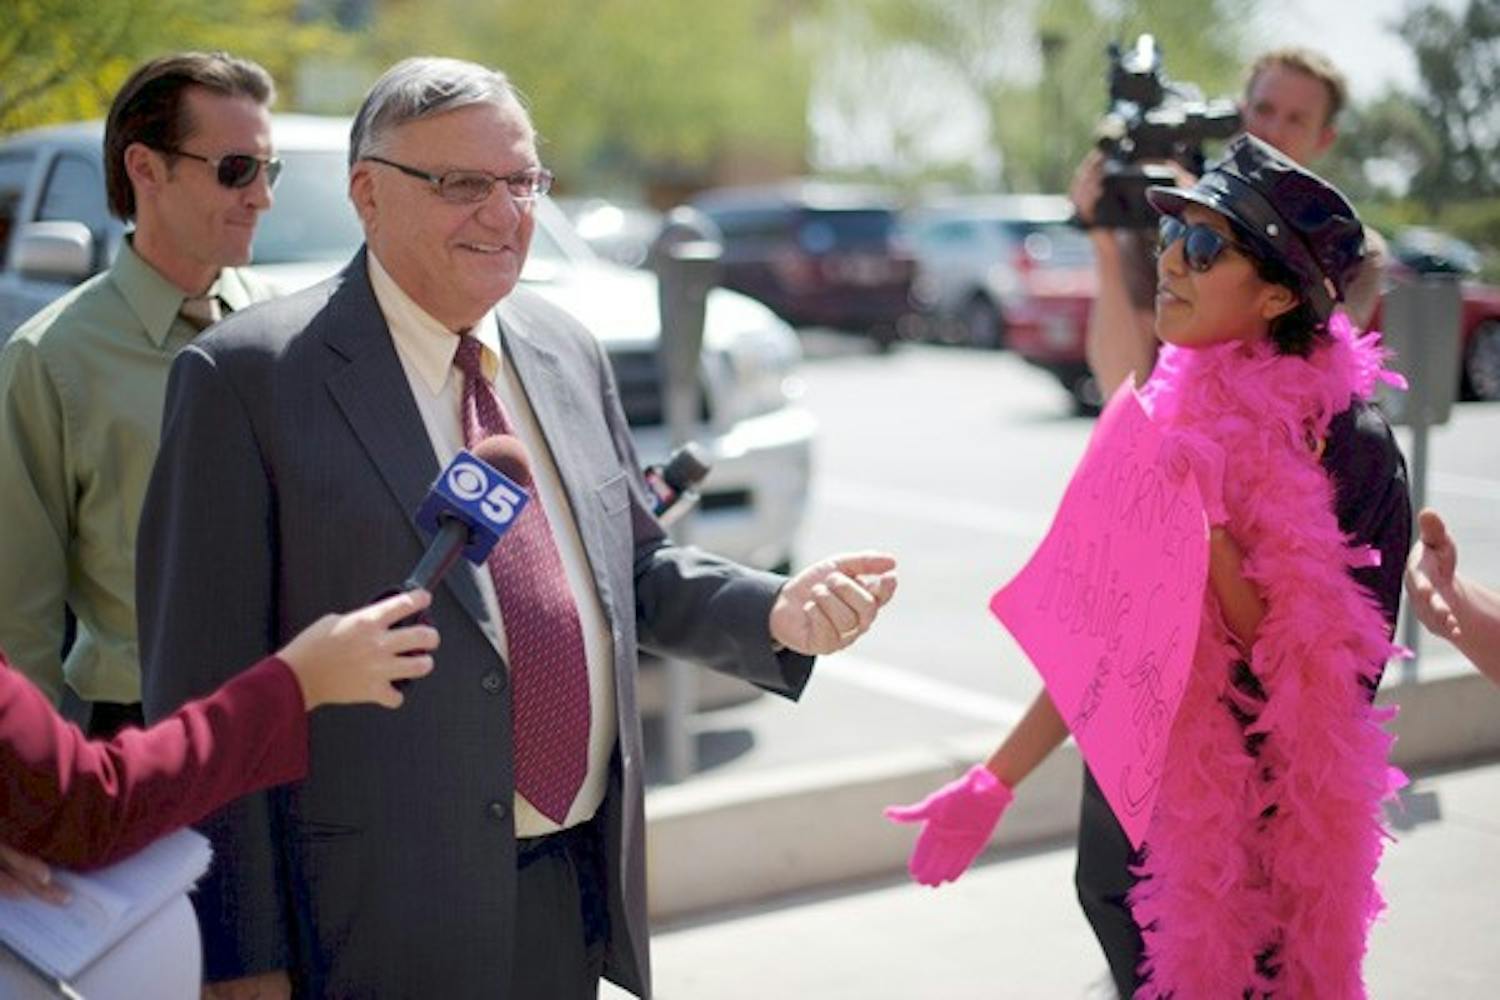 PROTESTING IN PINK: Students identified as Performers for Public Safety confronted Maricopa County Sheriff Joe Arpaio with police outfits covered in pink boas while he visited ASU on Thursday to discuss immigration issues. (Photo by Michael Arellano) 